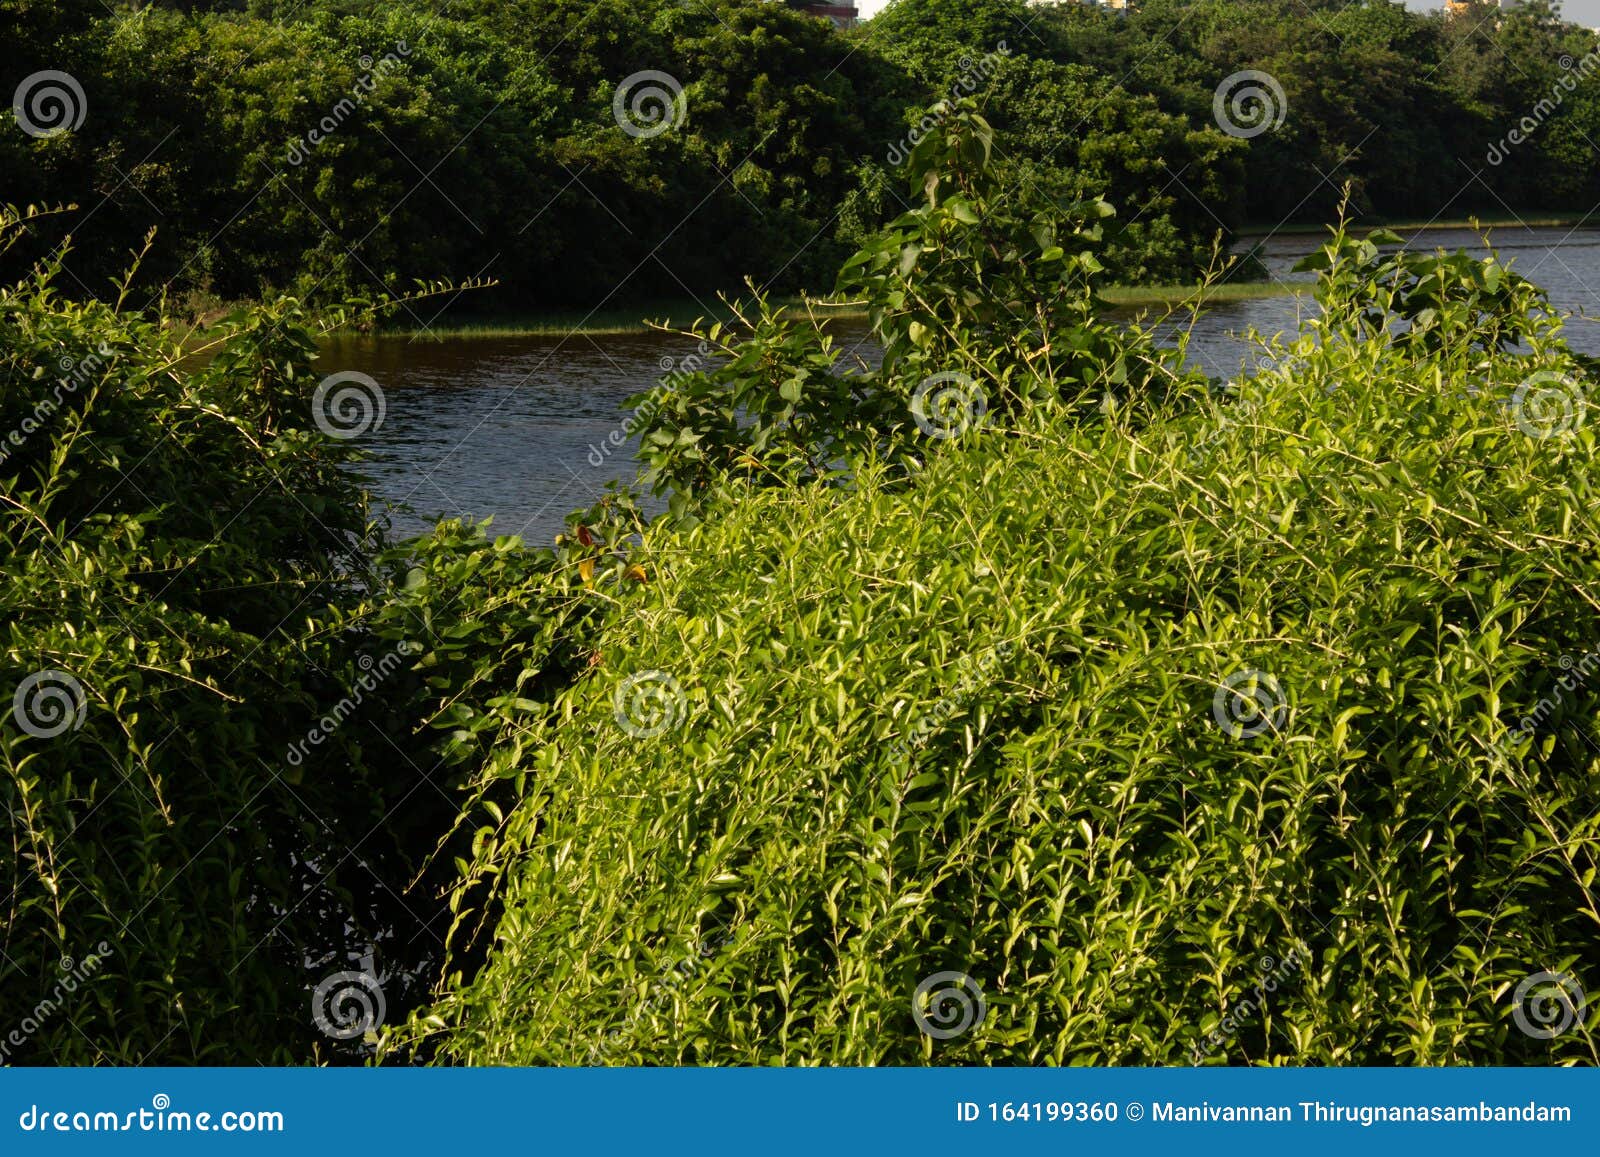 Greenery of Lush Vegetation and Freshwater in a Park Stock Photo ...